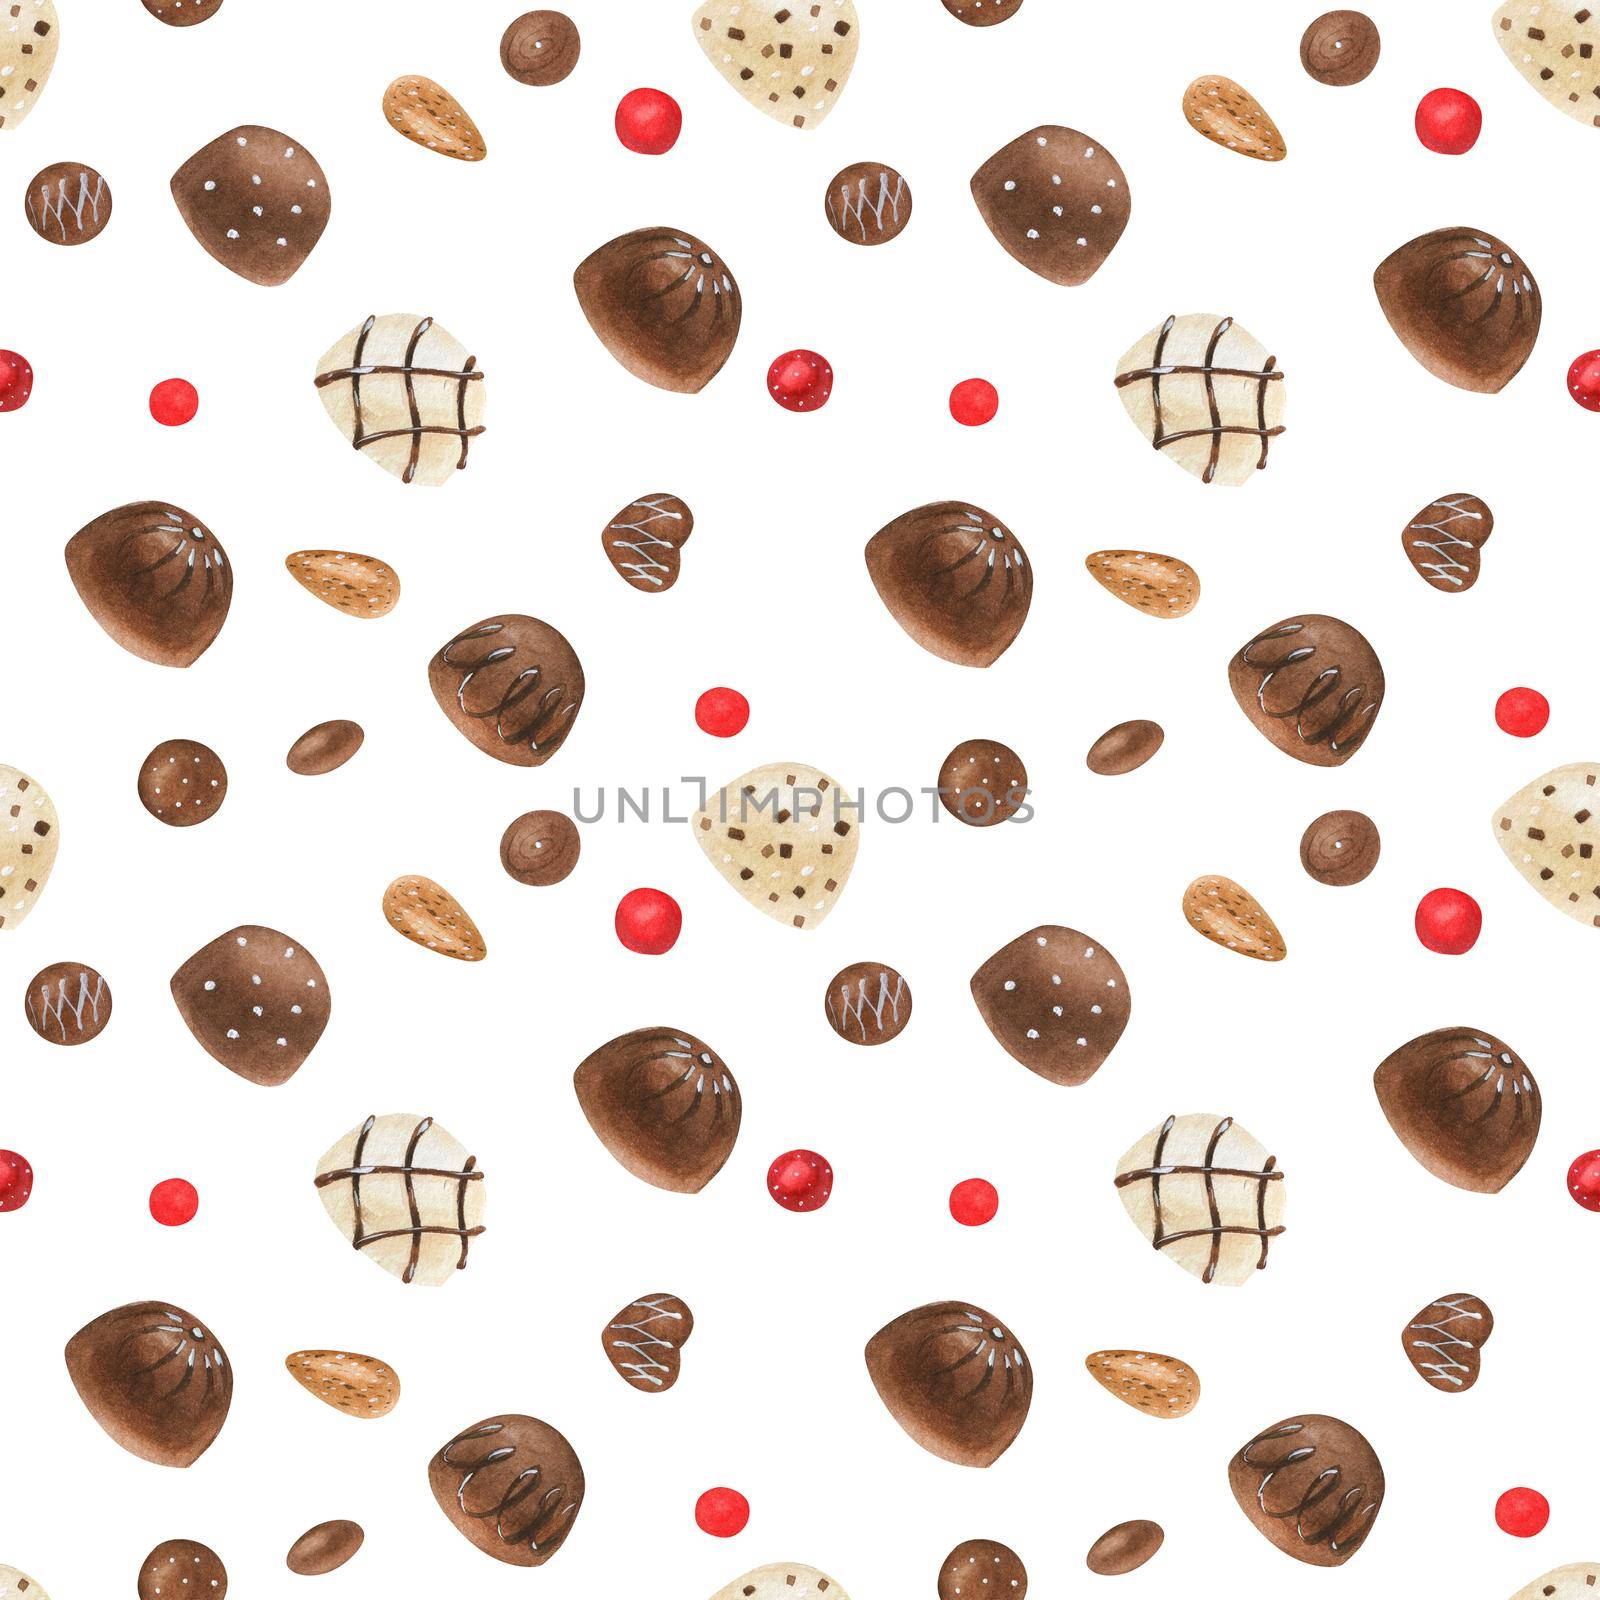 Sweet seamless pattern with chocolate candies. Watercolor illustration for any event decoration, white background, path included